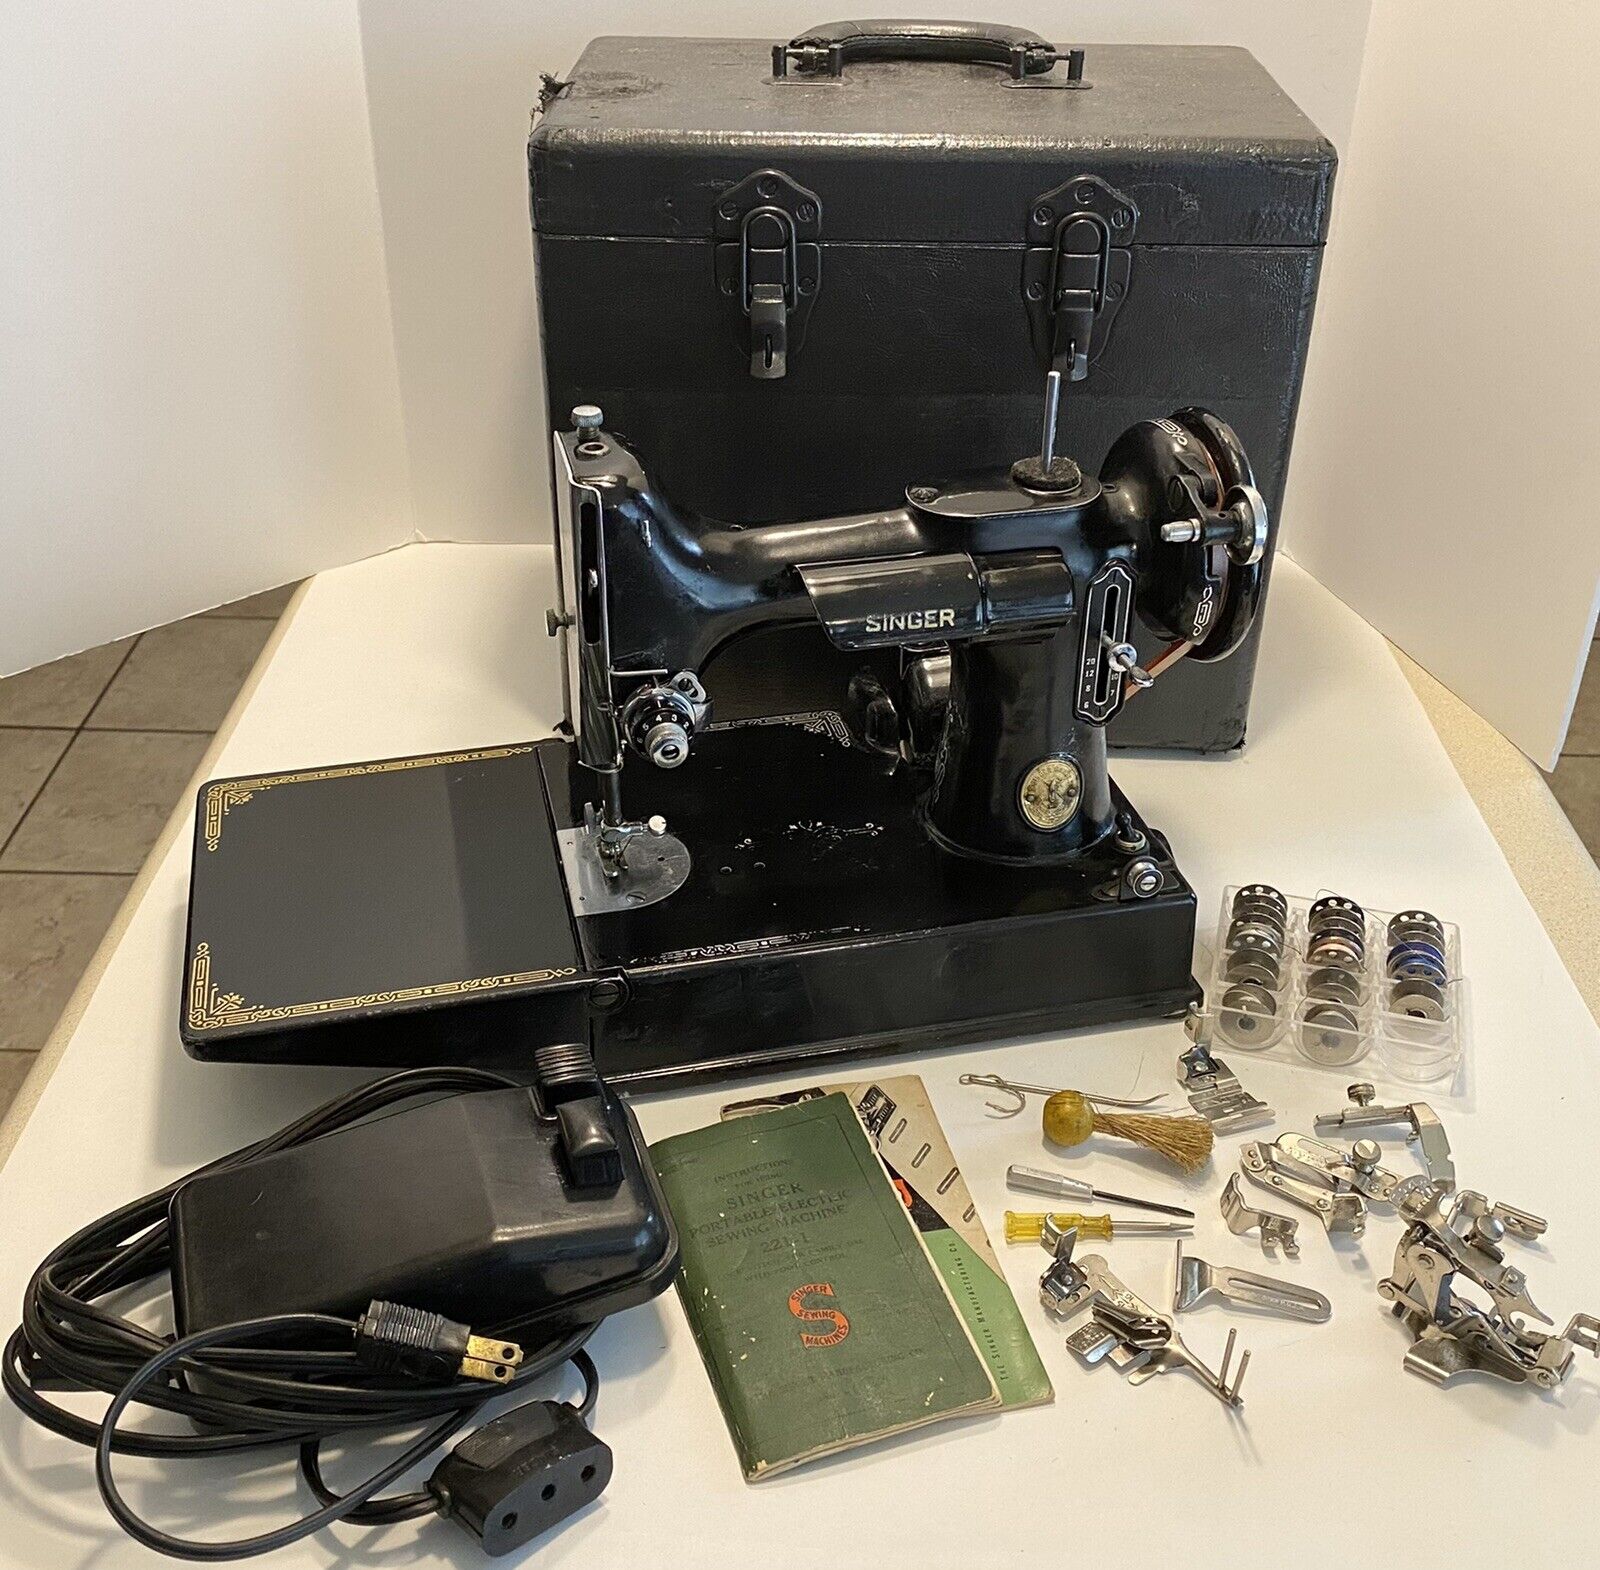 Vintage Singer Portable Electric Sewing Machine 221-1 with Case & Accessories